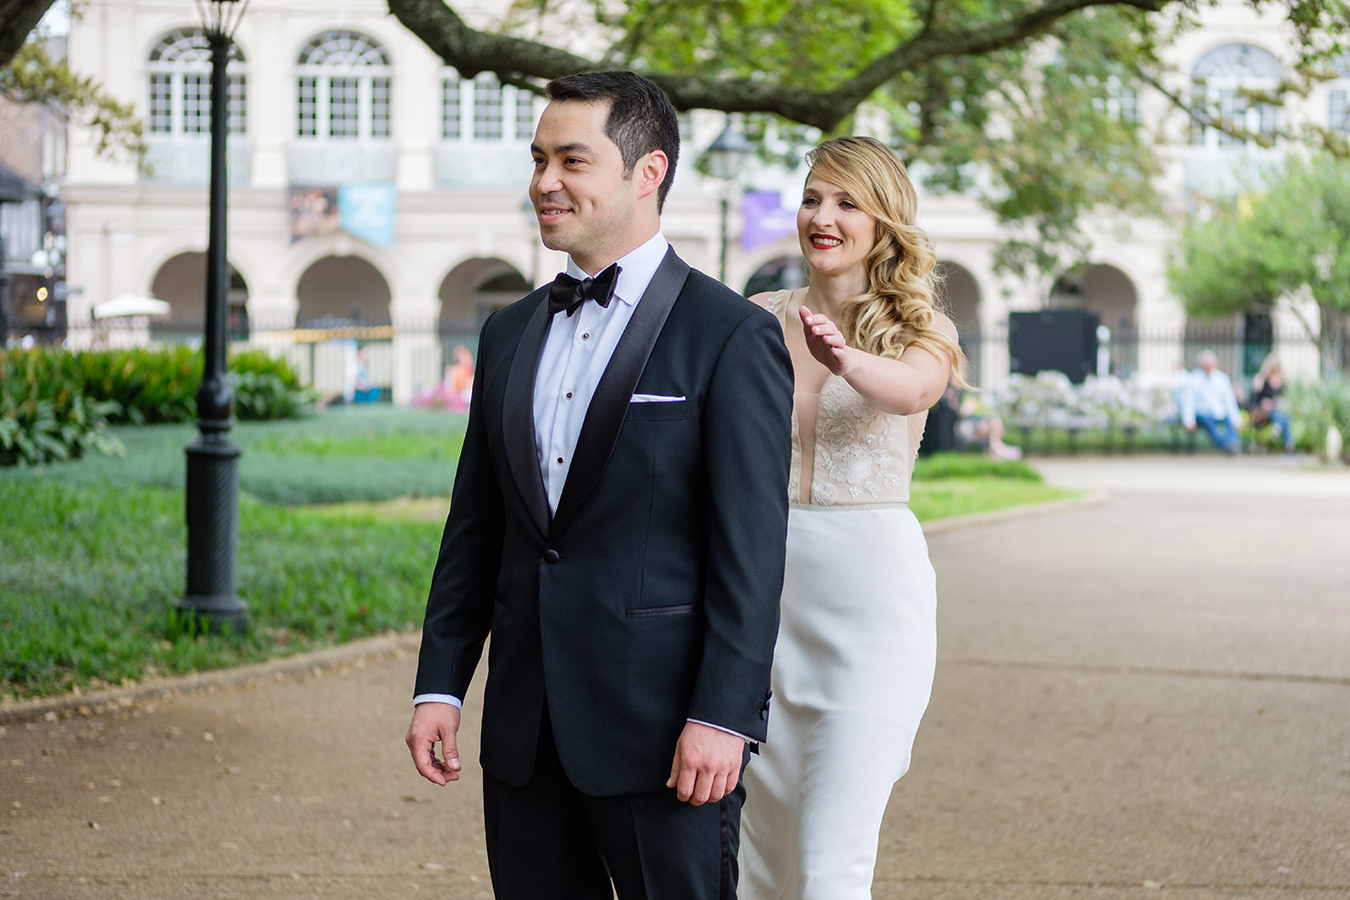 Alex and Greg planned a "First Look" in Jackson Square and then spent time taking photos together with the St. Louis Cathedral as the backdrop.